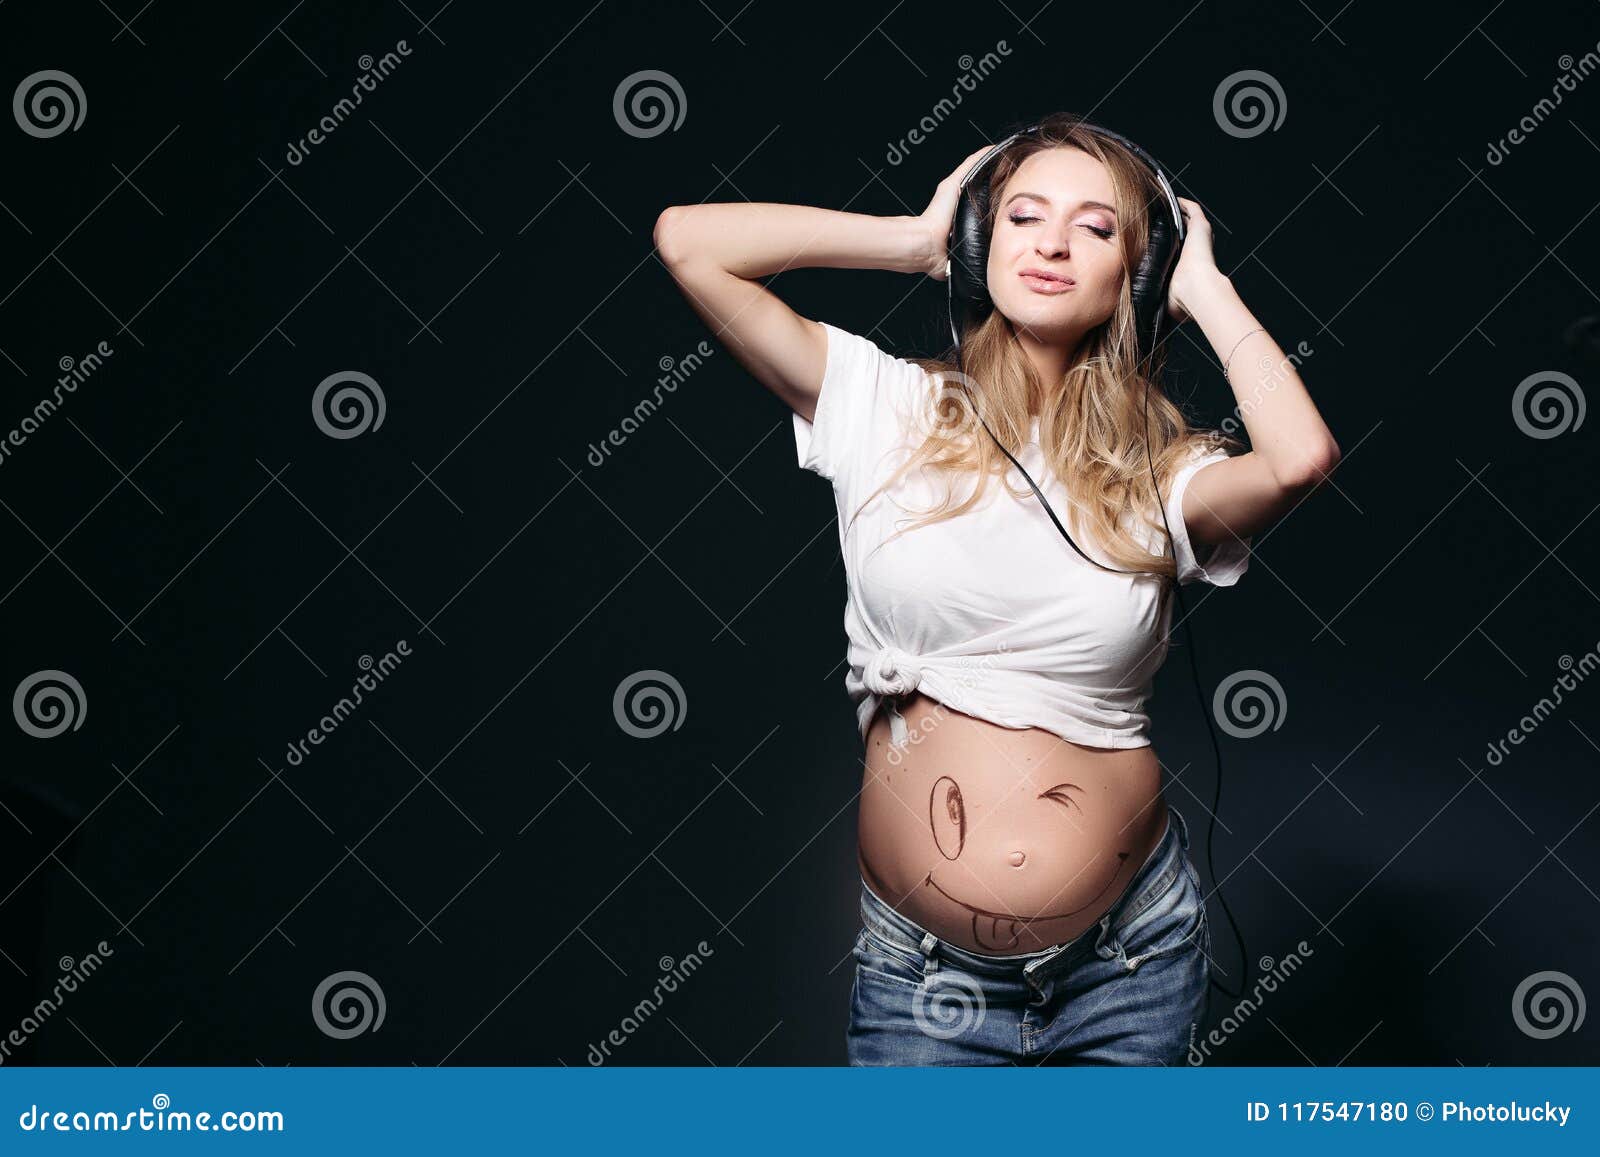 Long Hair Pregnant Nude - Pregnant Woman Dancing And Smiling With Closed Eyes. Stock ...